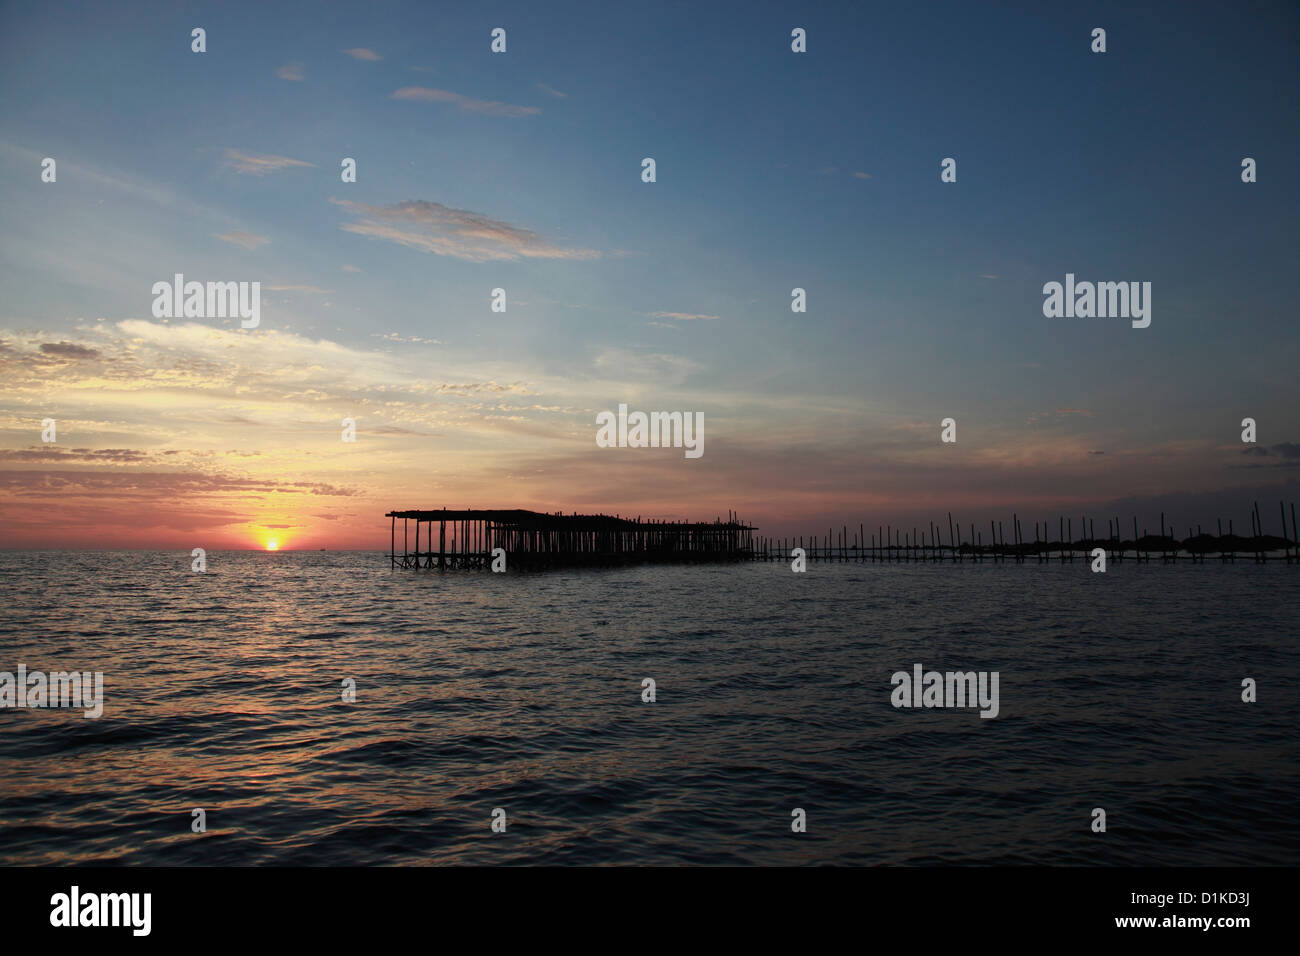 Sun setting in the ocean with pier in foreground, Cambodia Stock Photo